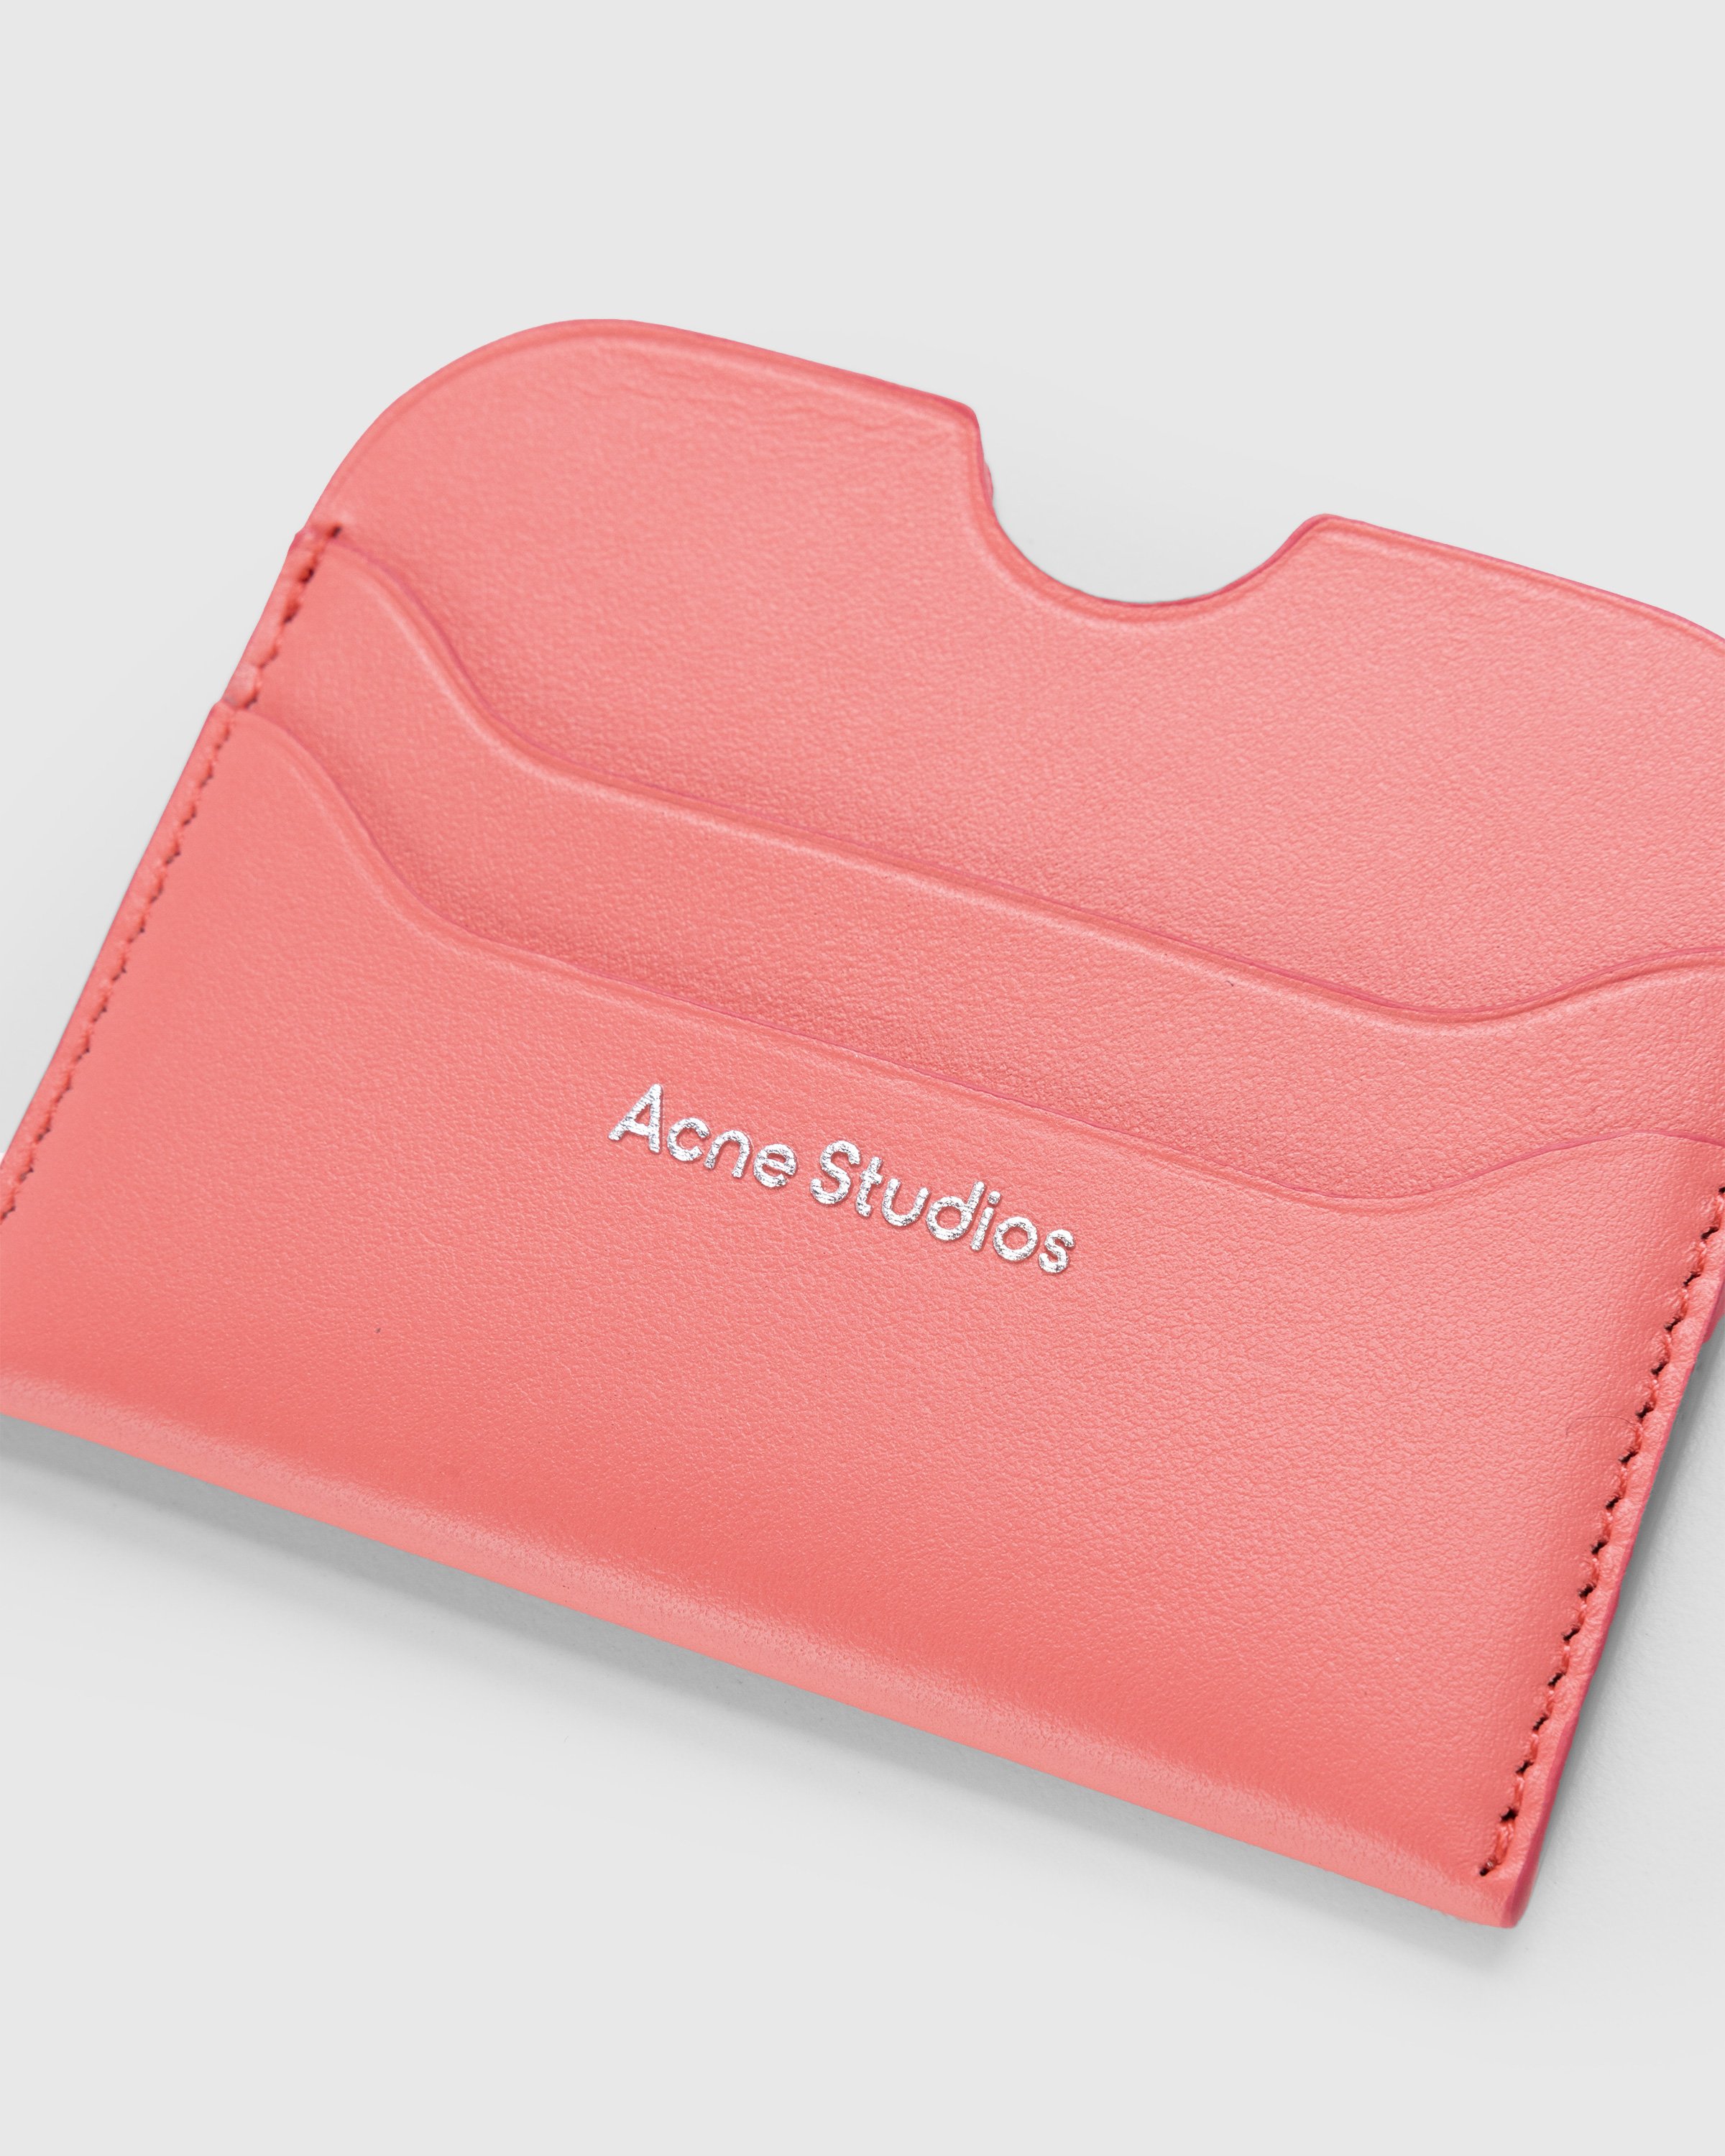 Acne Studios - Leather Card Holder Electric Pink - Accessories - Pink - Image 3